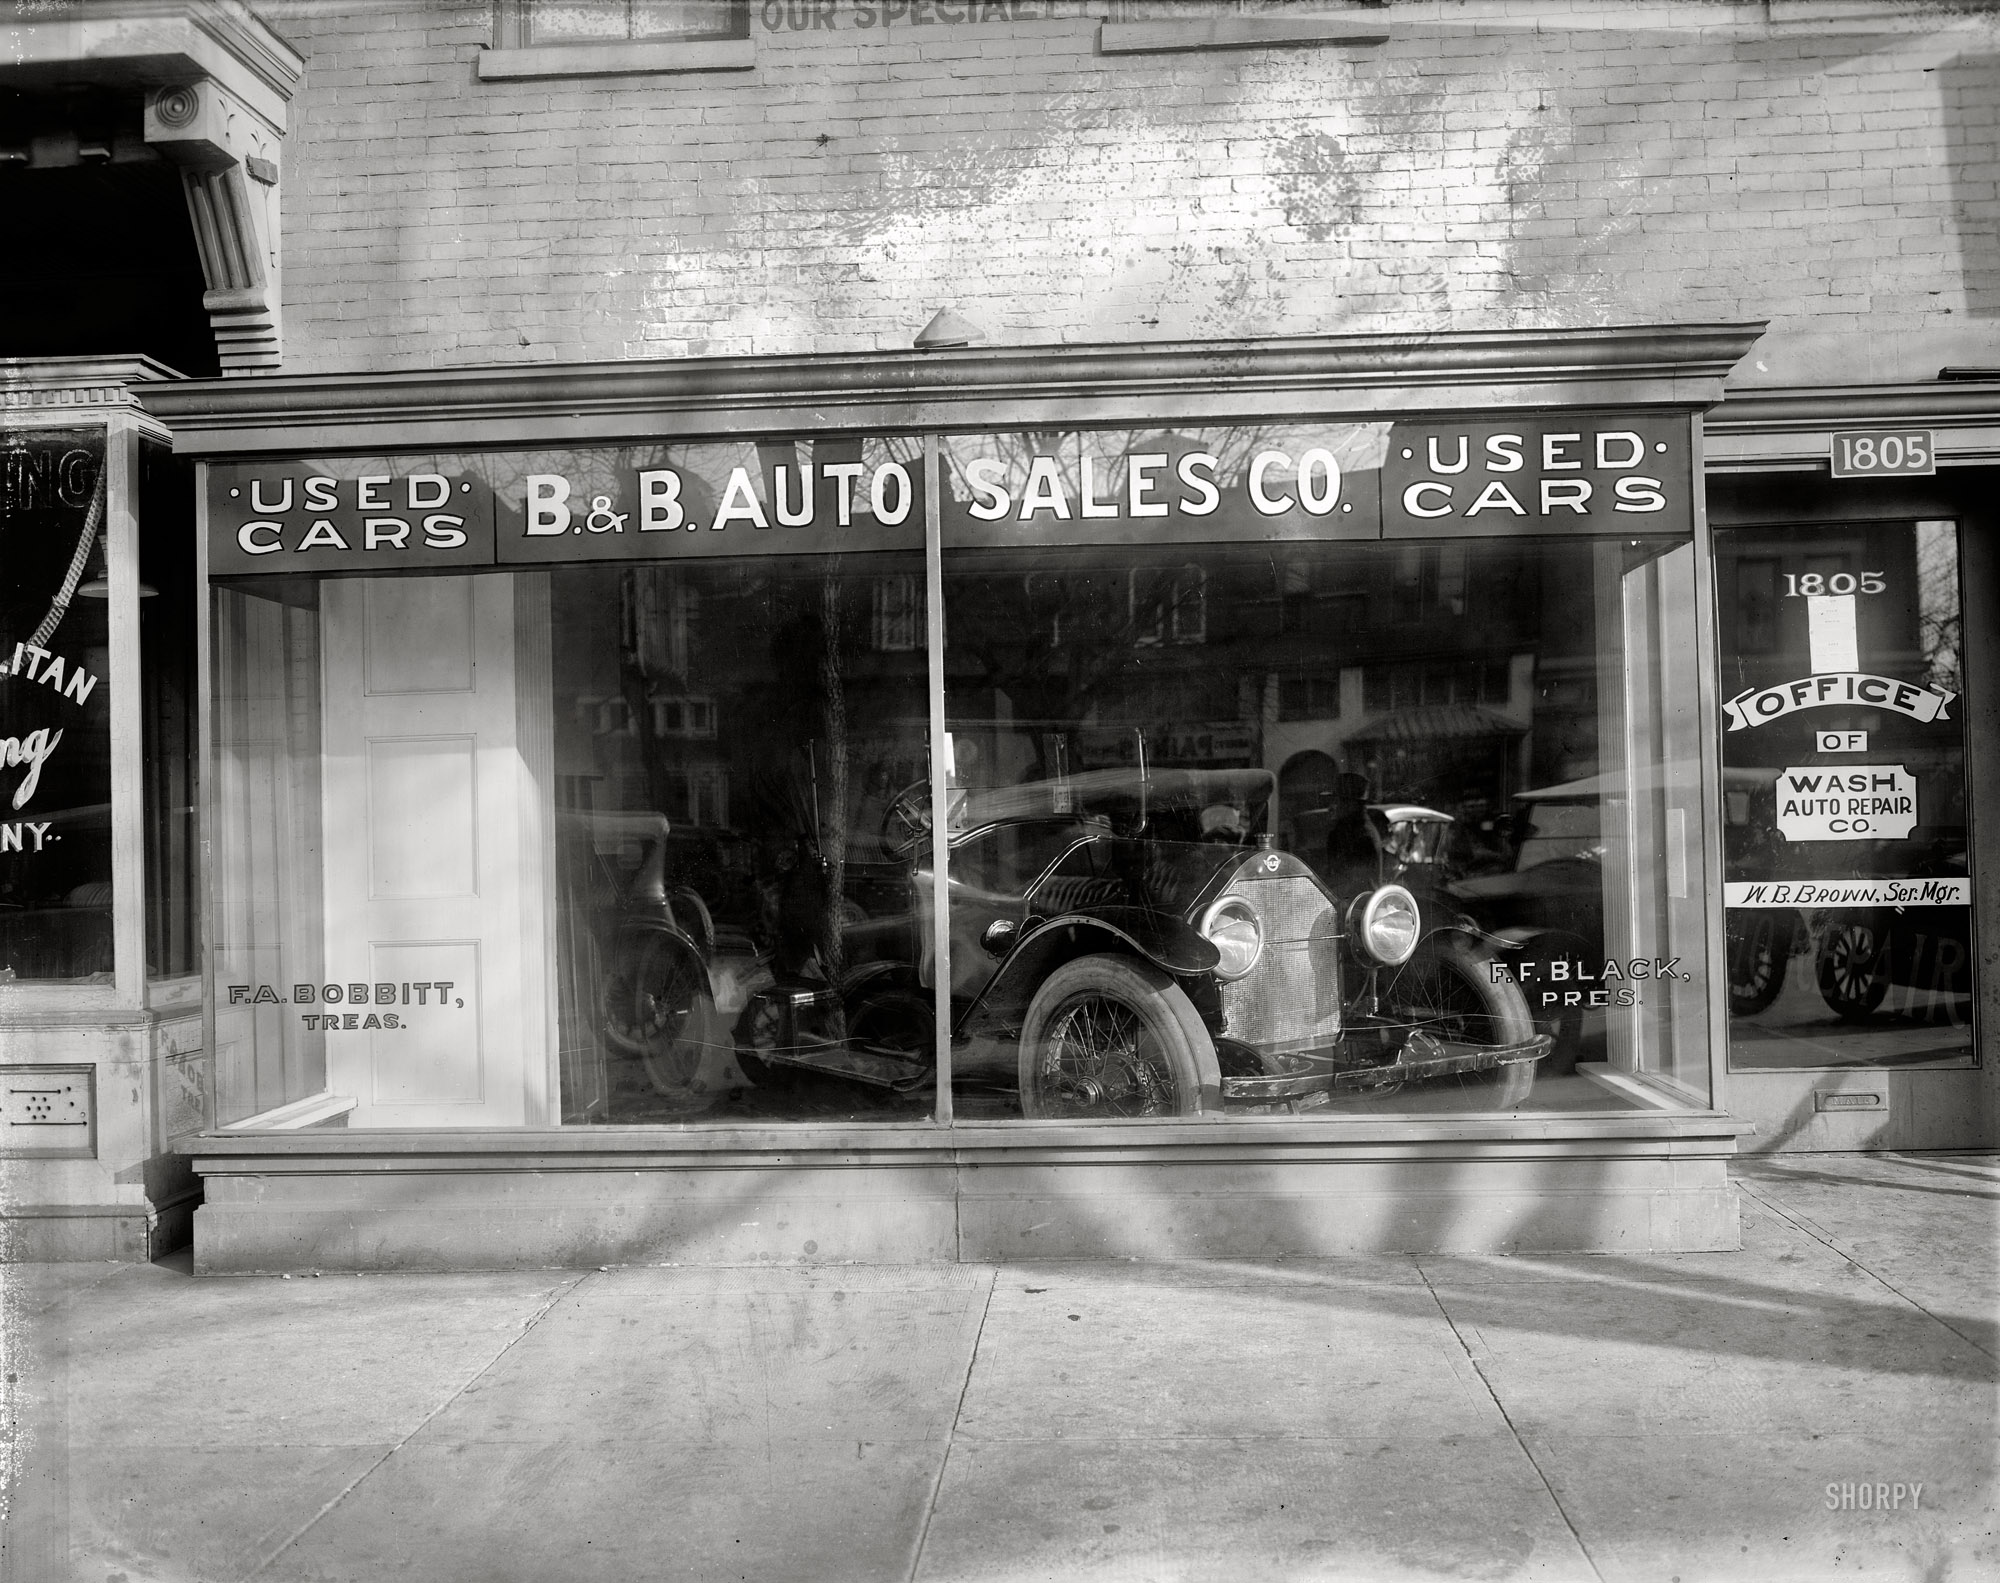 Washington, D.C., circa 1920. "B&B Auto Sales, 14th Street N.W." How much is that Stutz in the window? National Photo Co. glass negative. View full size.